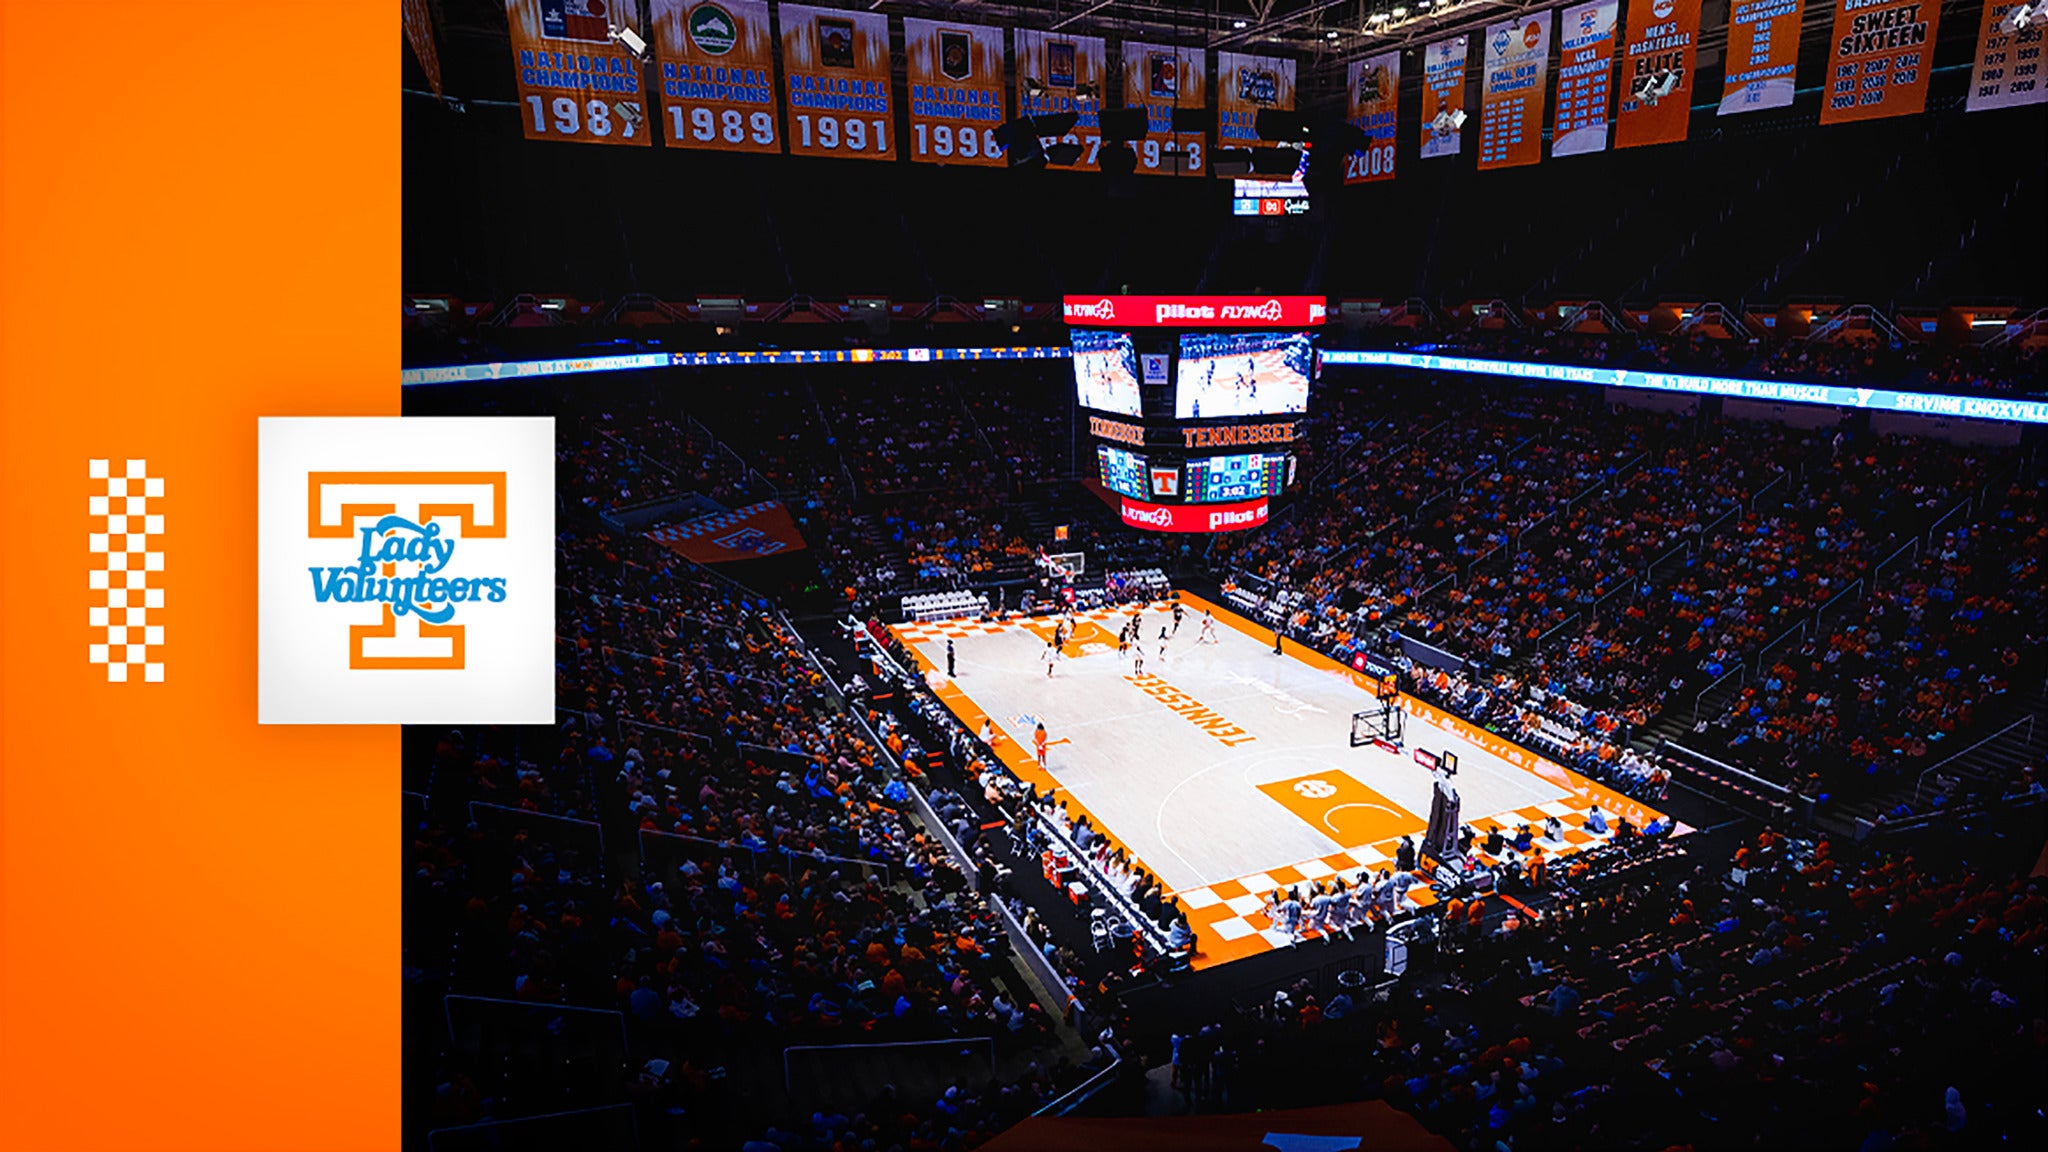 Tennessee Lady Volunteers Women's Basketball vs. Ole Miss Rebels Womens Basketball in Knoxville promo photo for Donor presale offer code